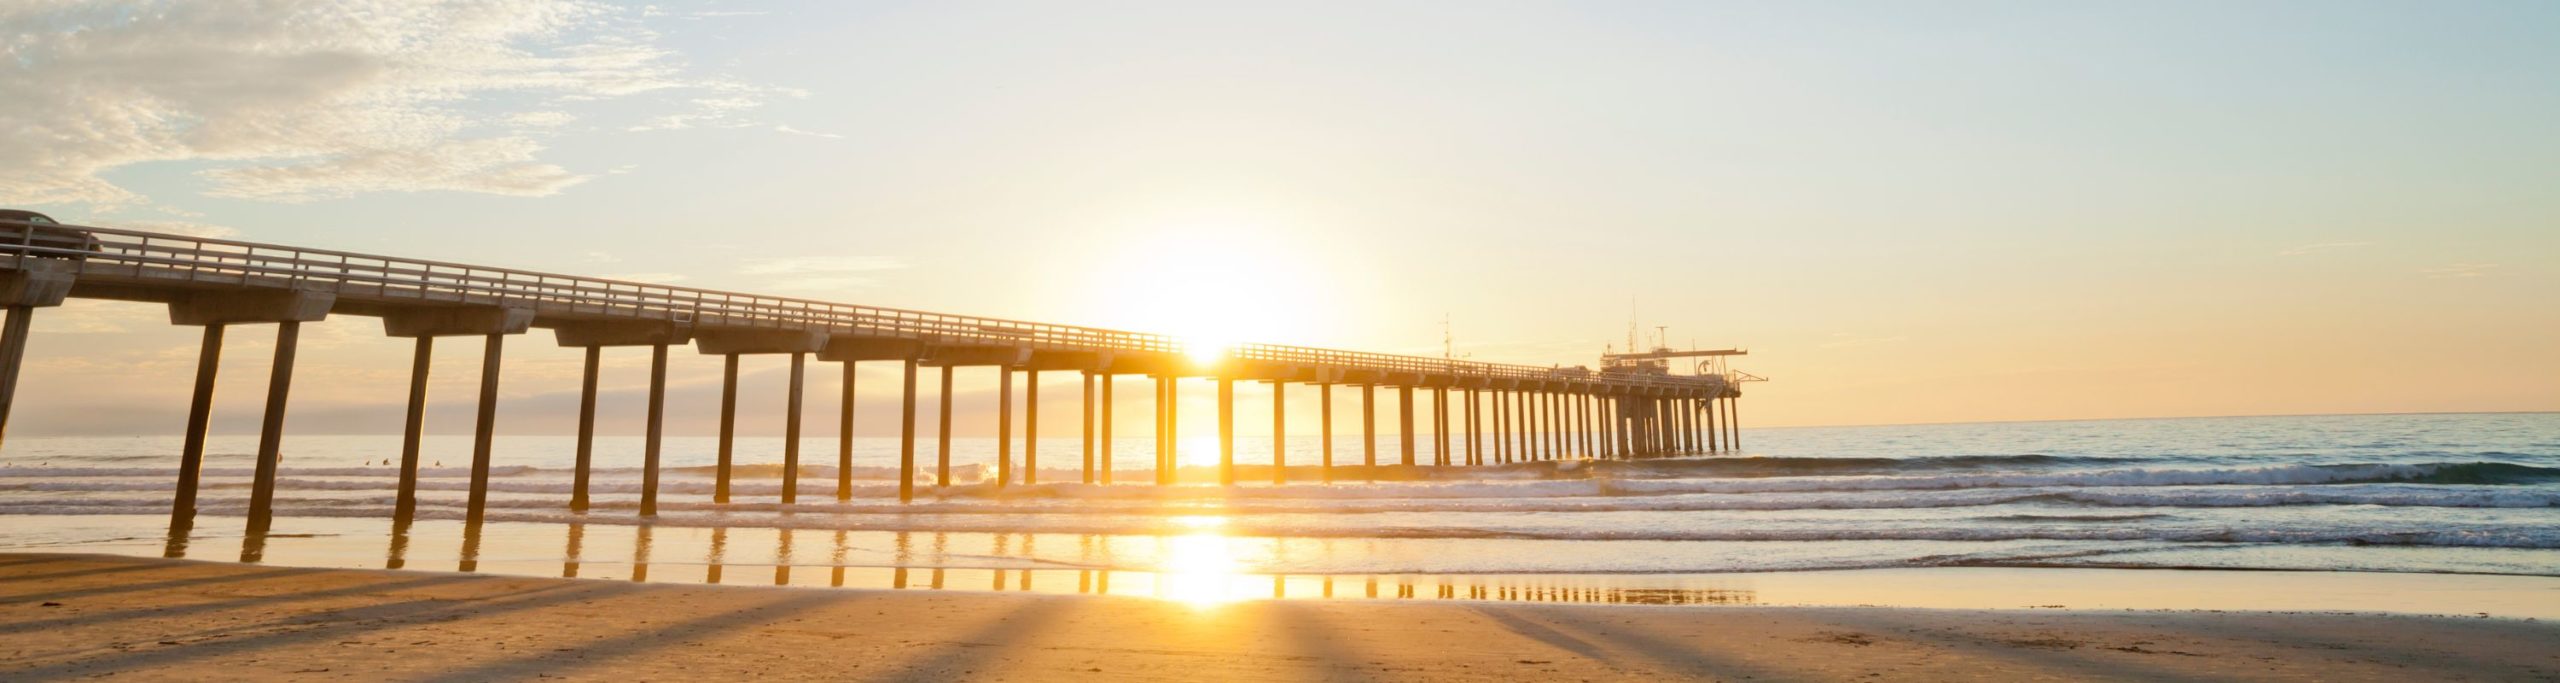 Attractions in San Diego Image of Beach & Pier